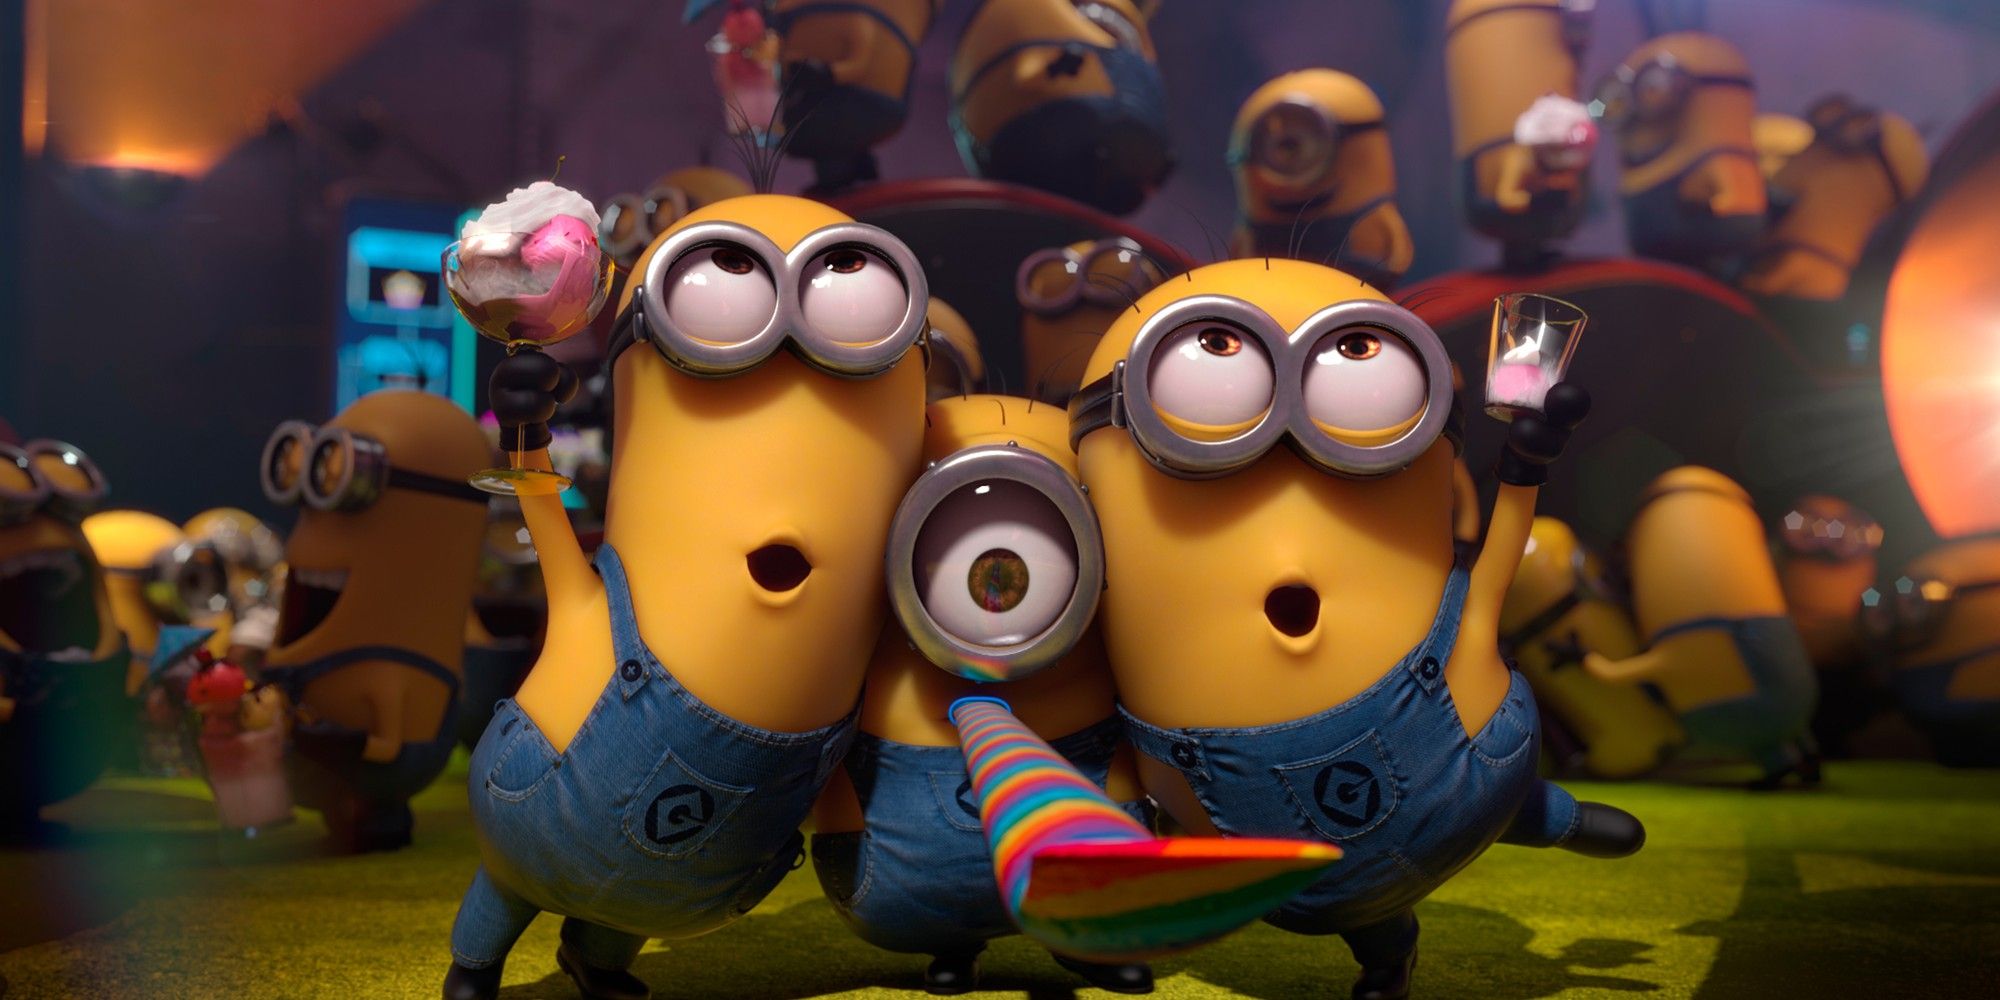 Watch: The Minions Return To Announce 'Despicable Me 2' By Singing